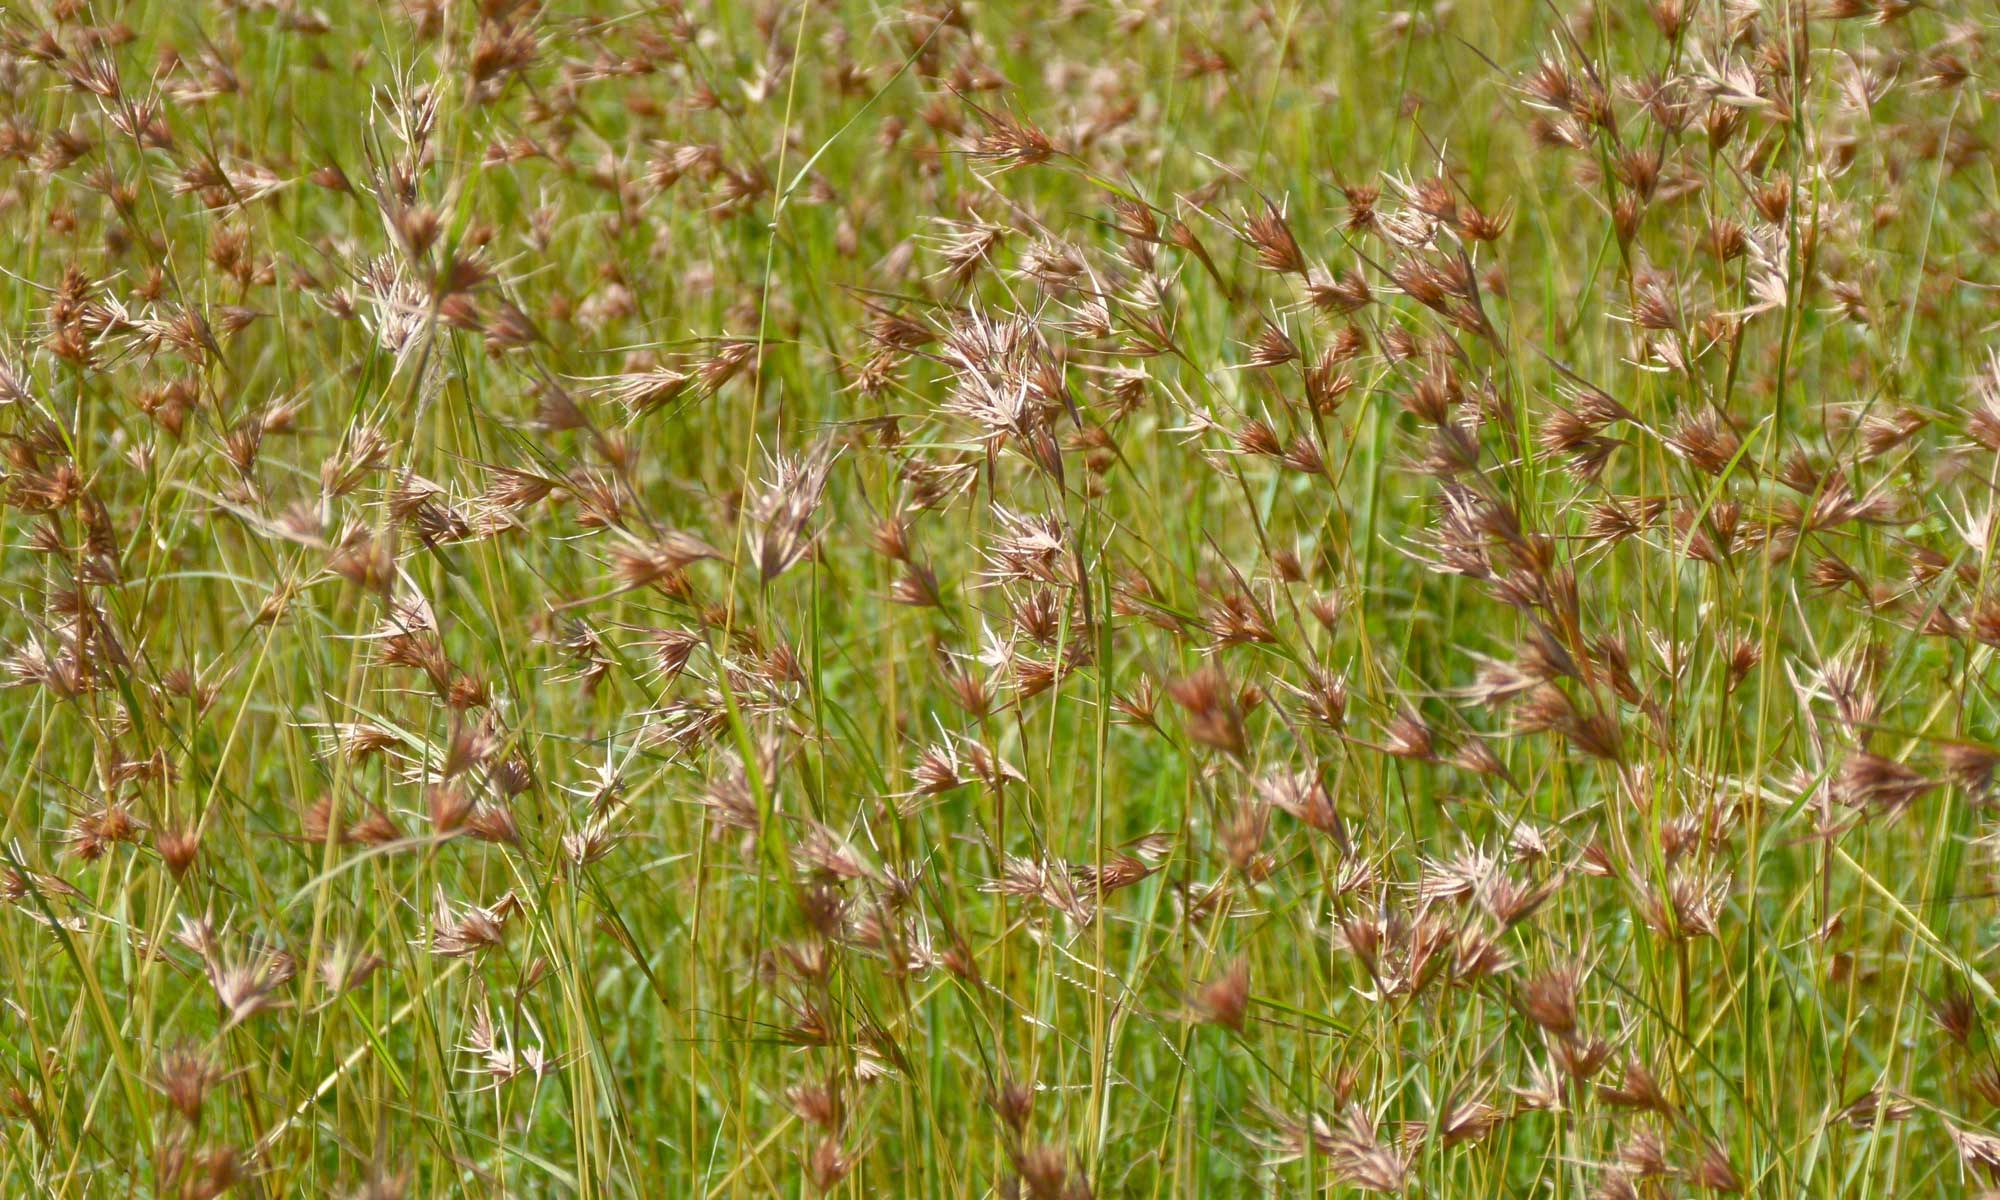 Photograph of kangaroo grass, also called red grass, in Kruger National Park, South Africa.